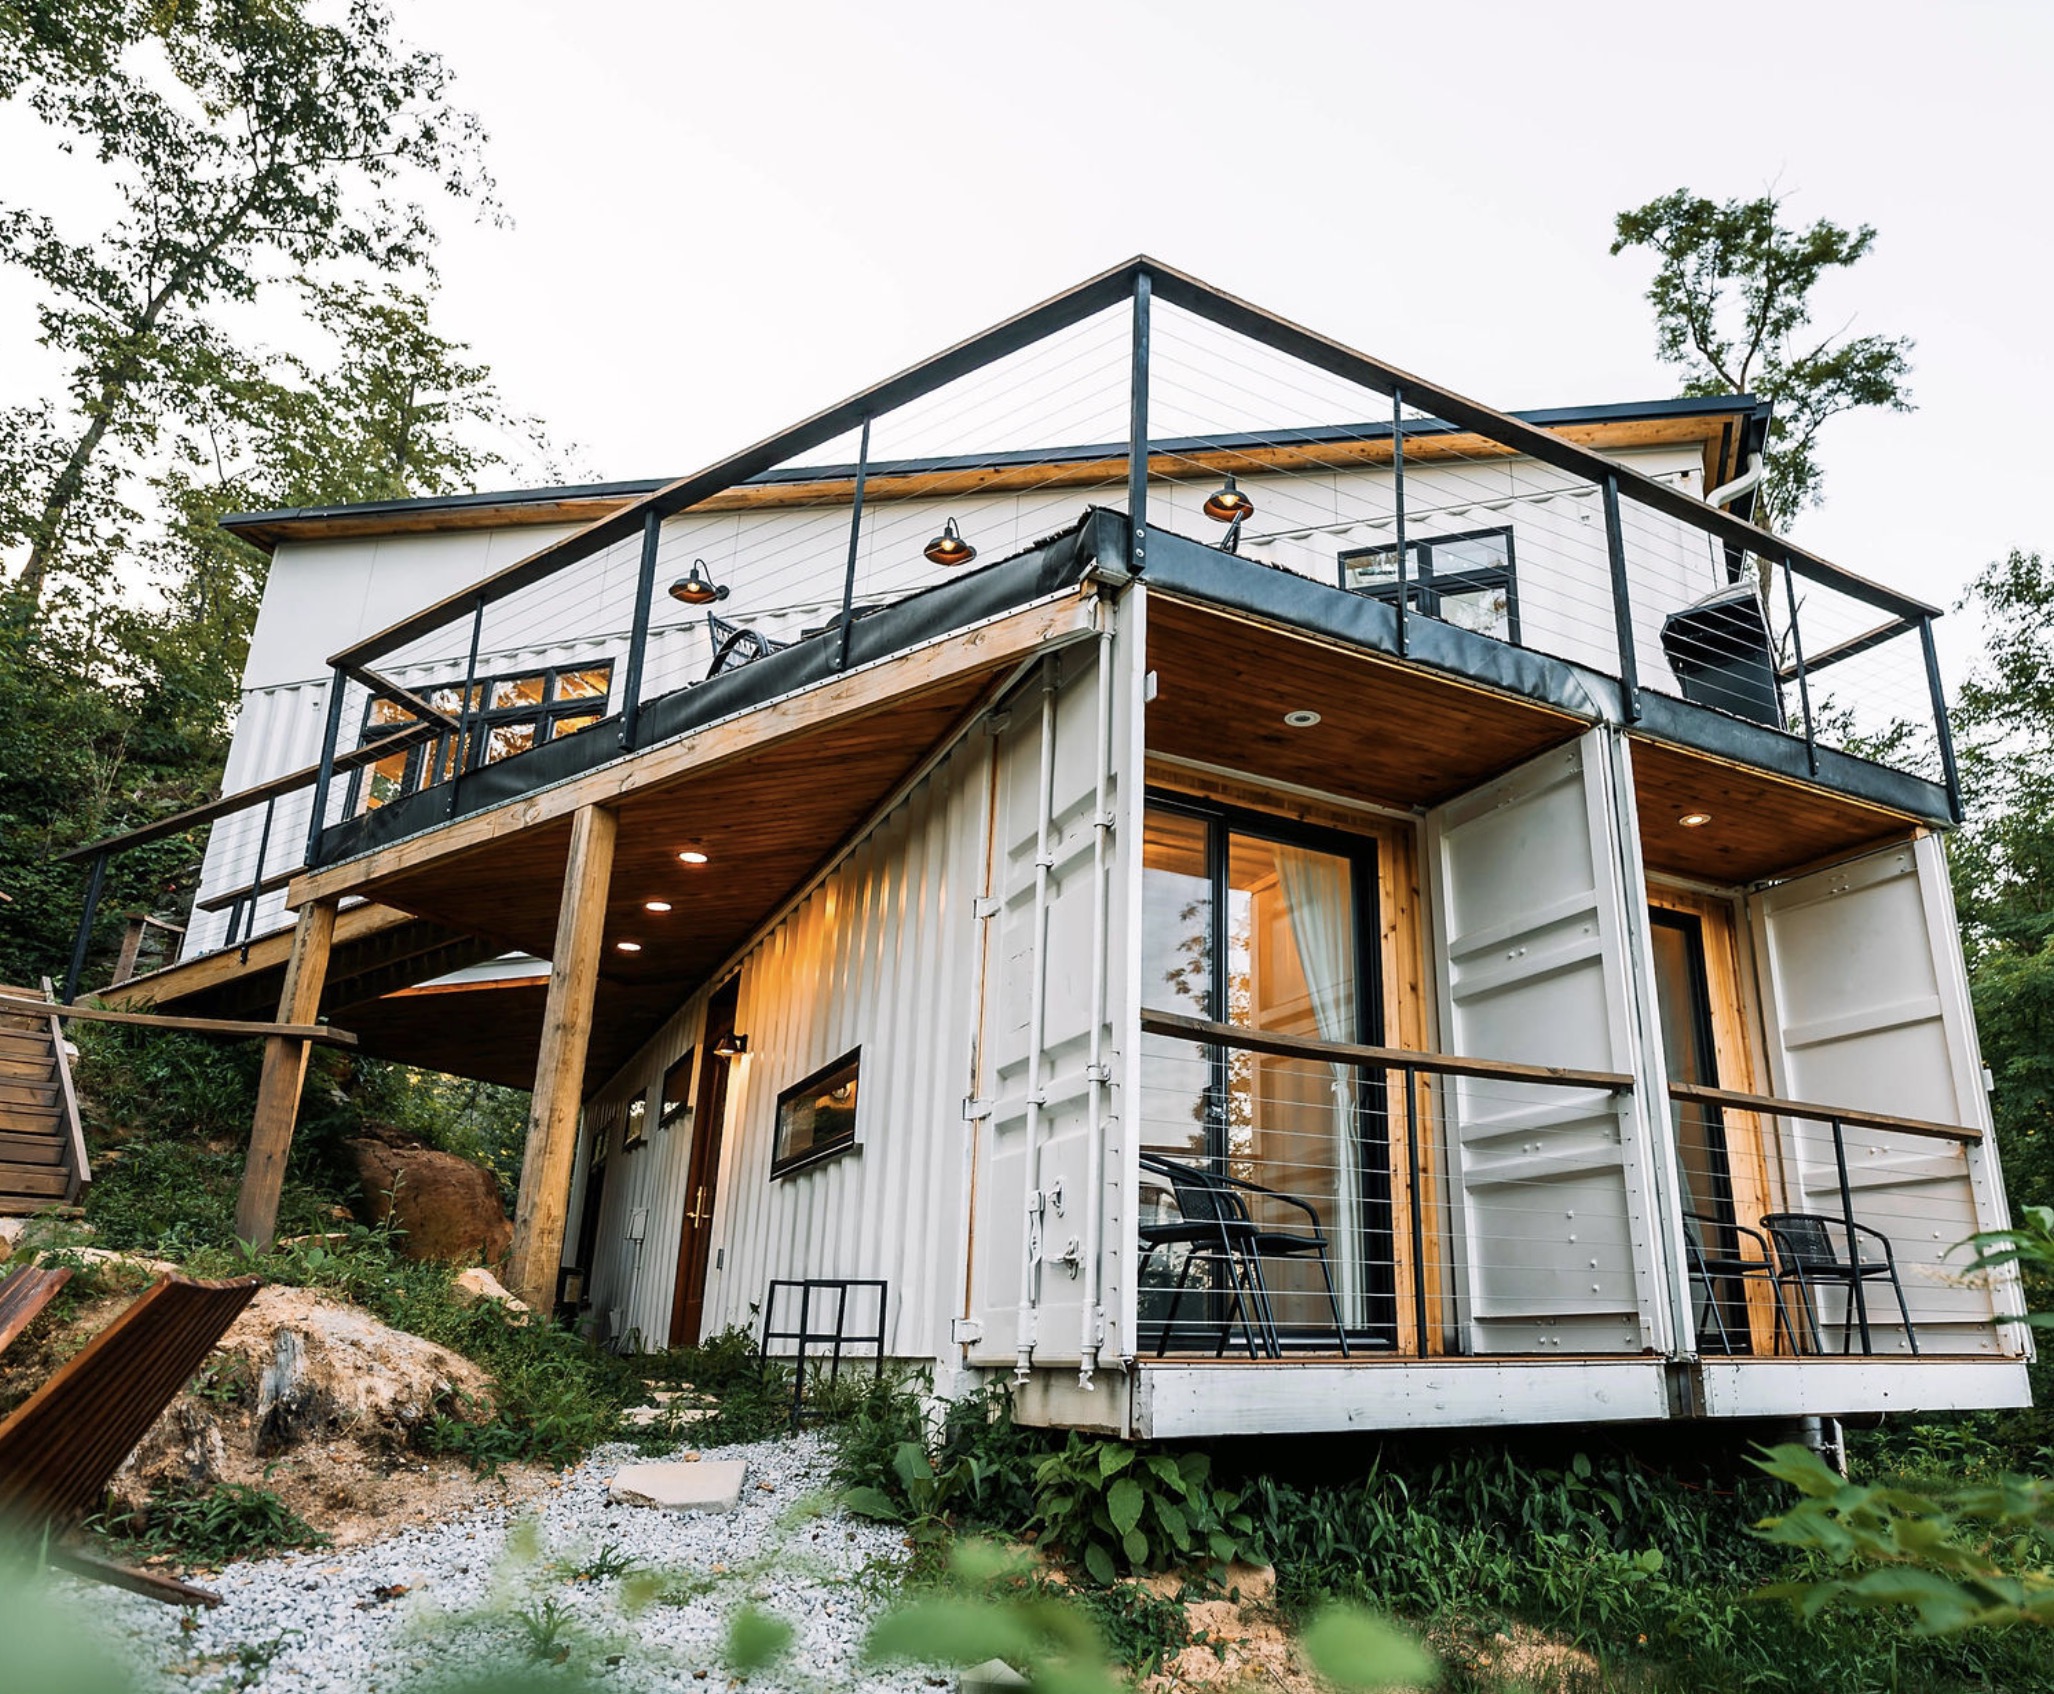 The Overlook Box Hop Shipping Container Home